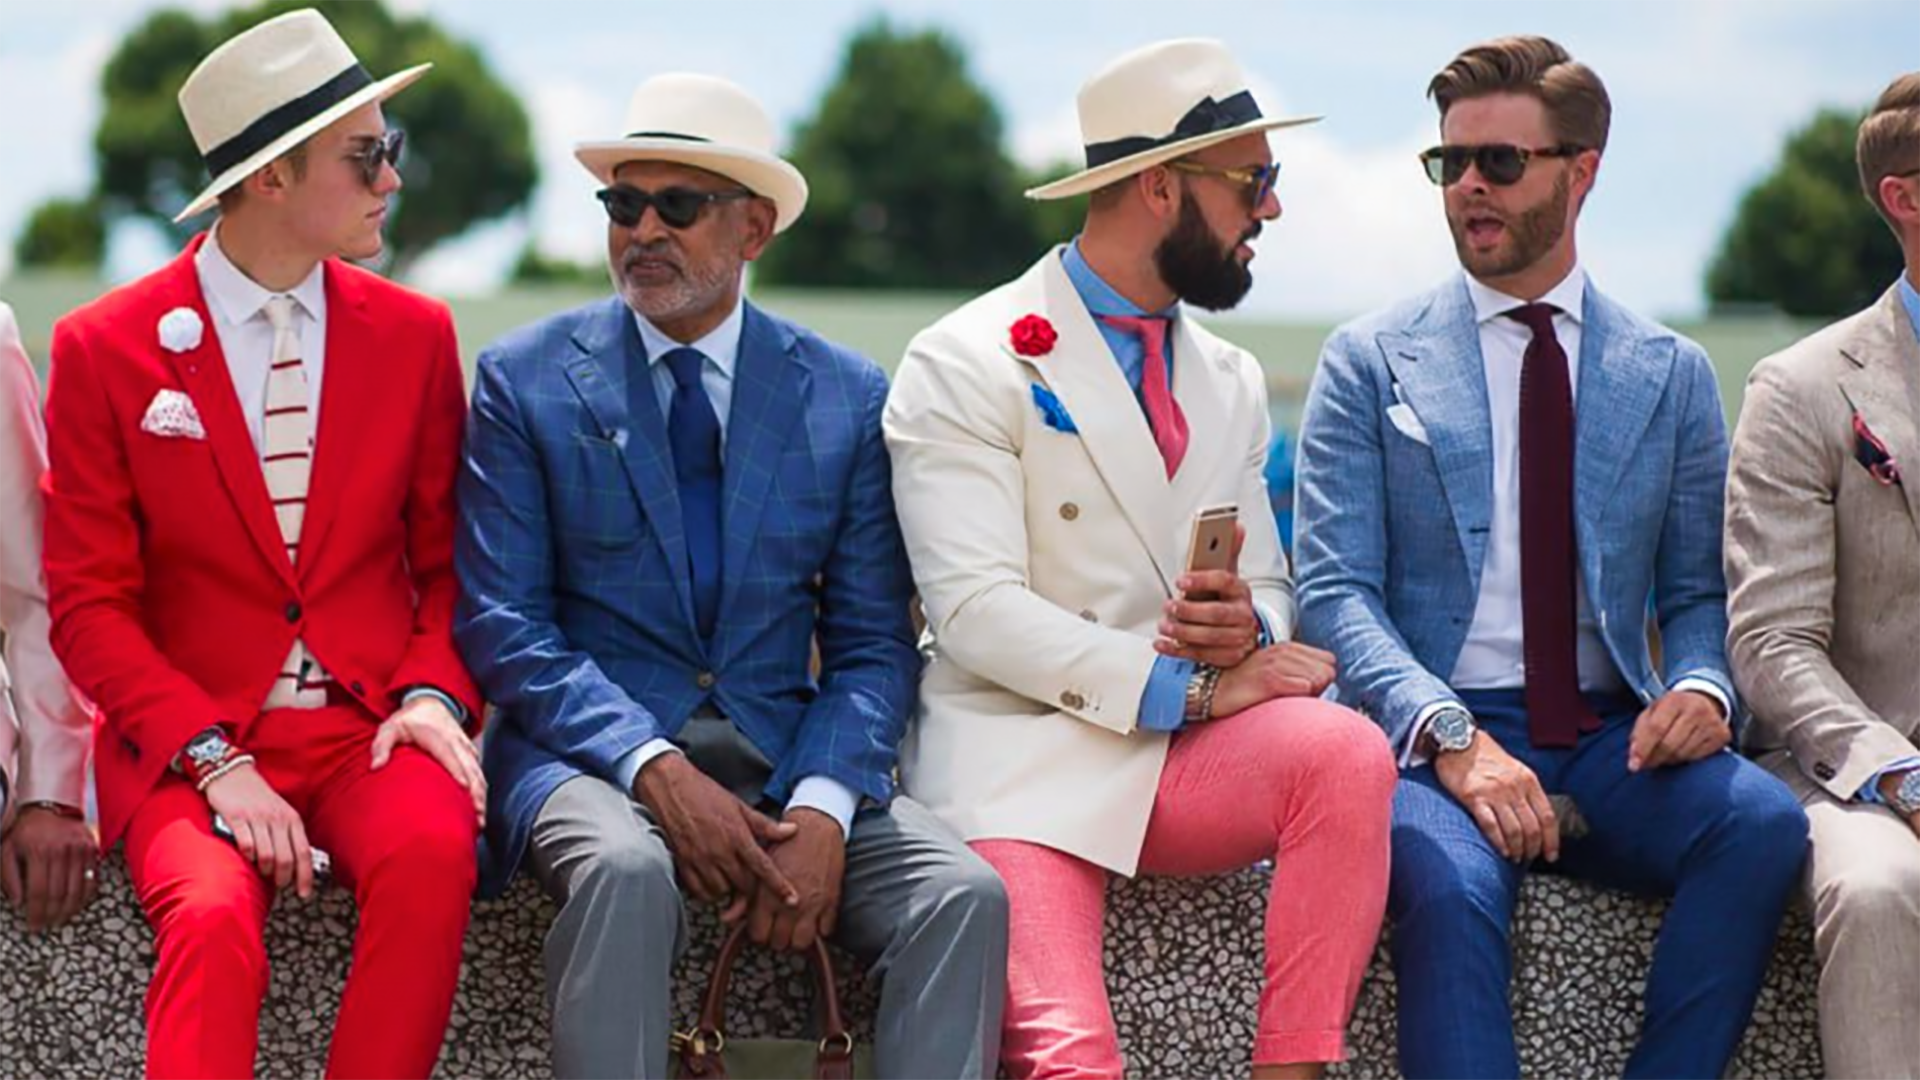 The Complete Guide to Men’s Fashion for Derby Season